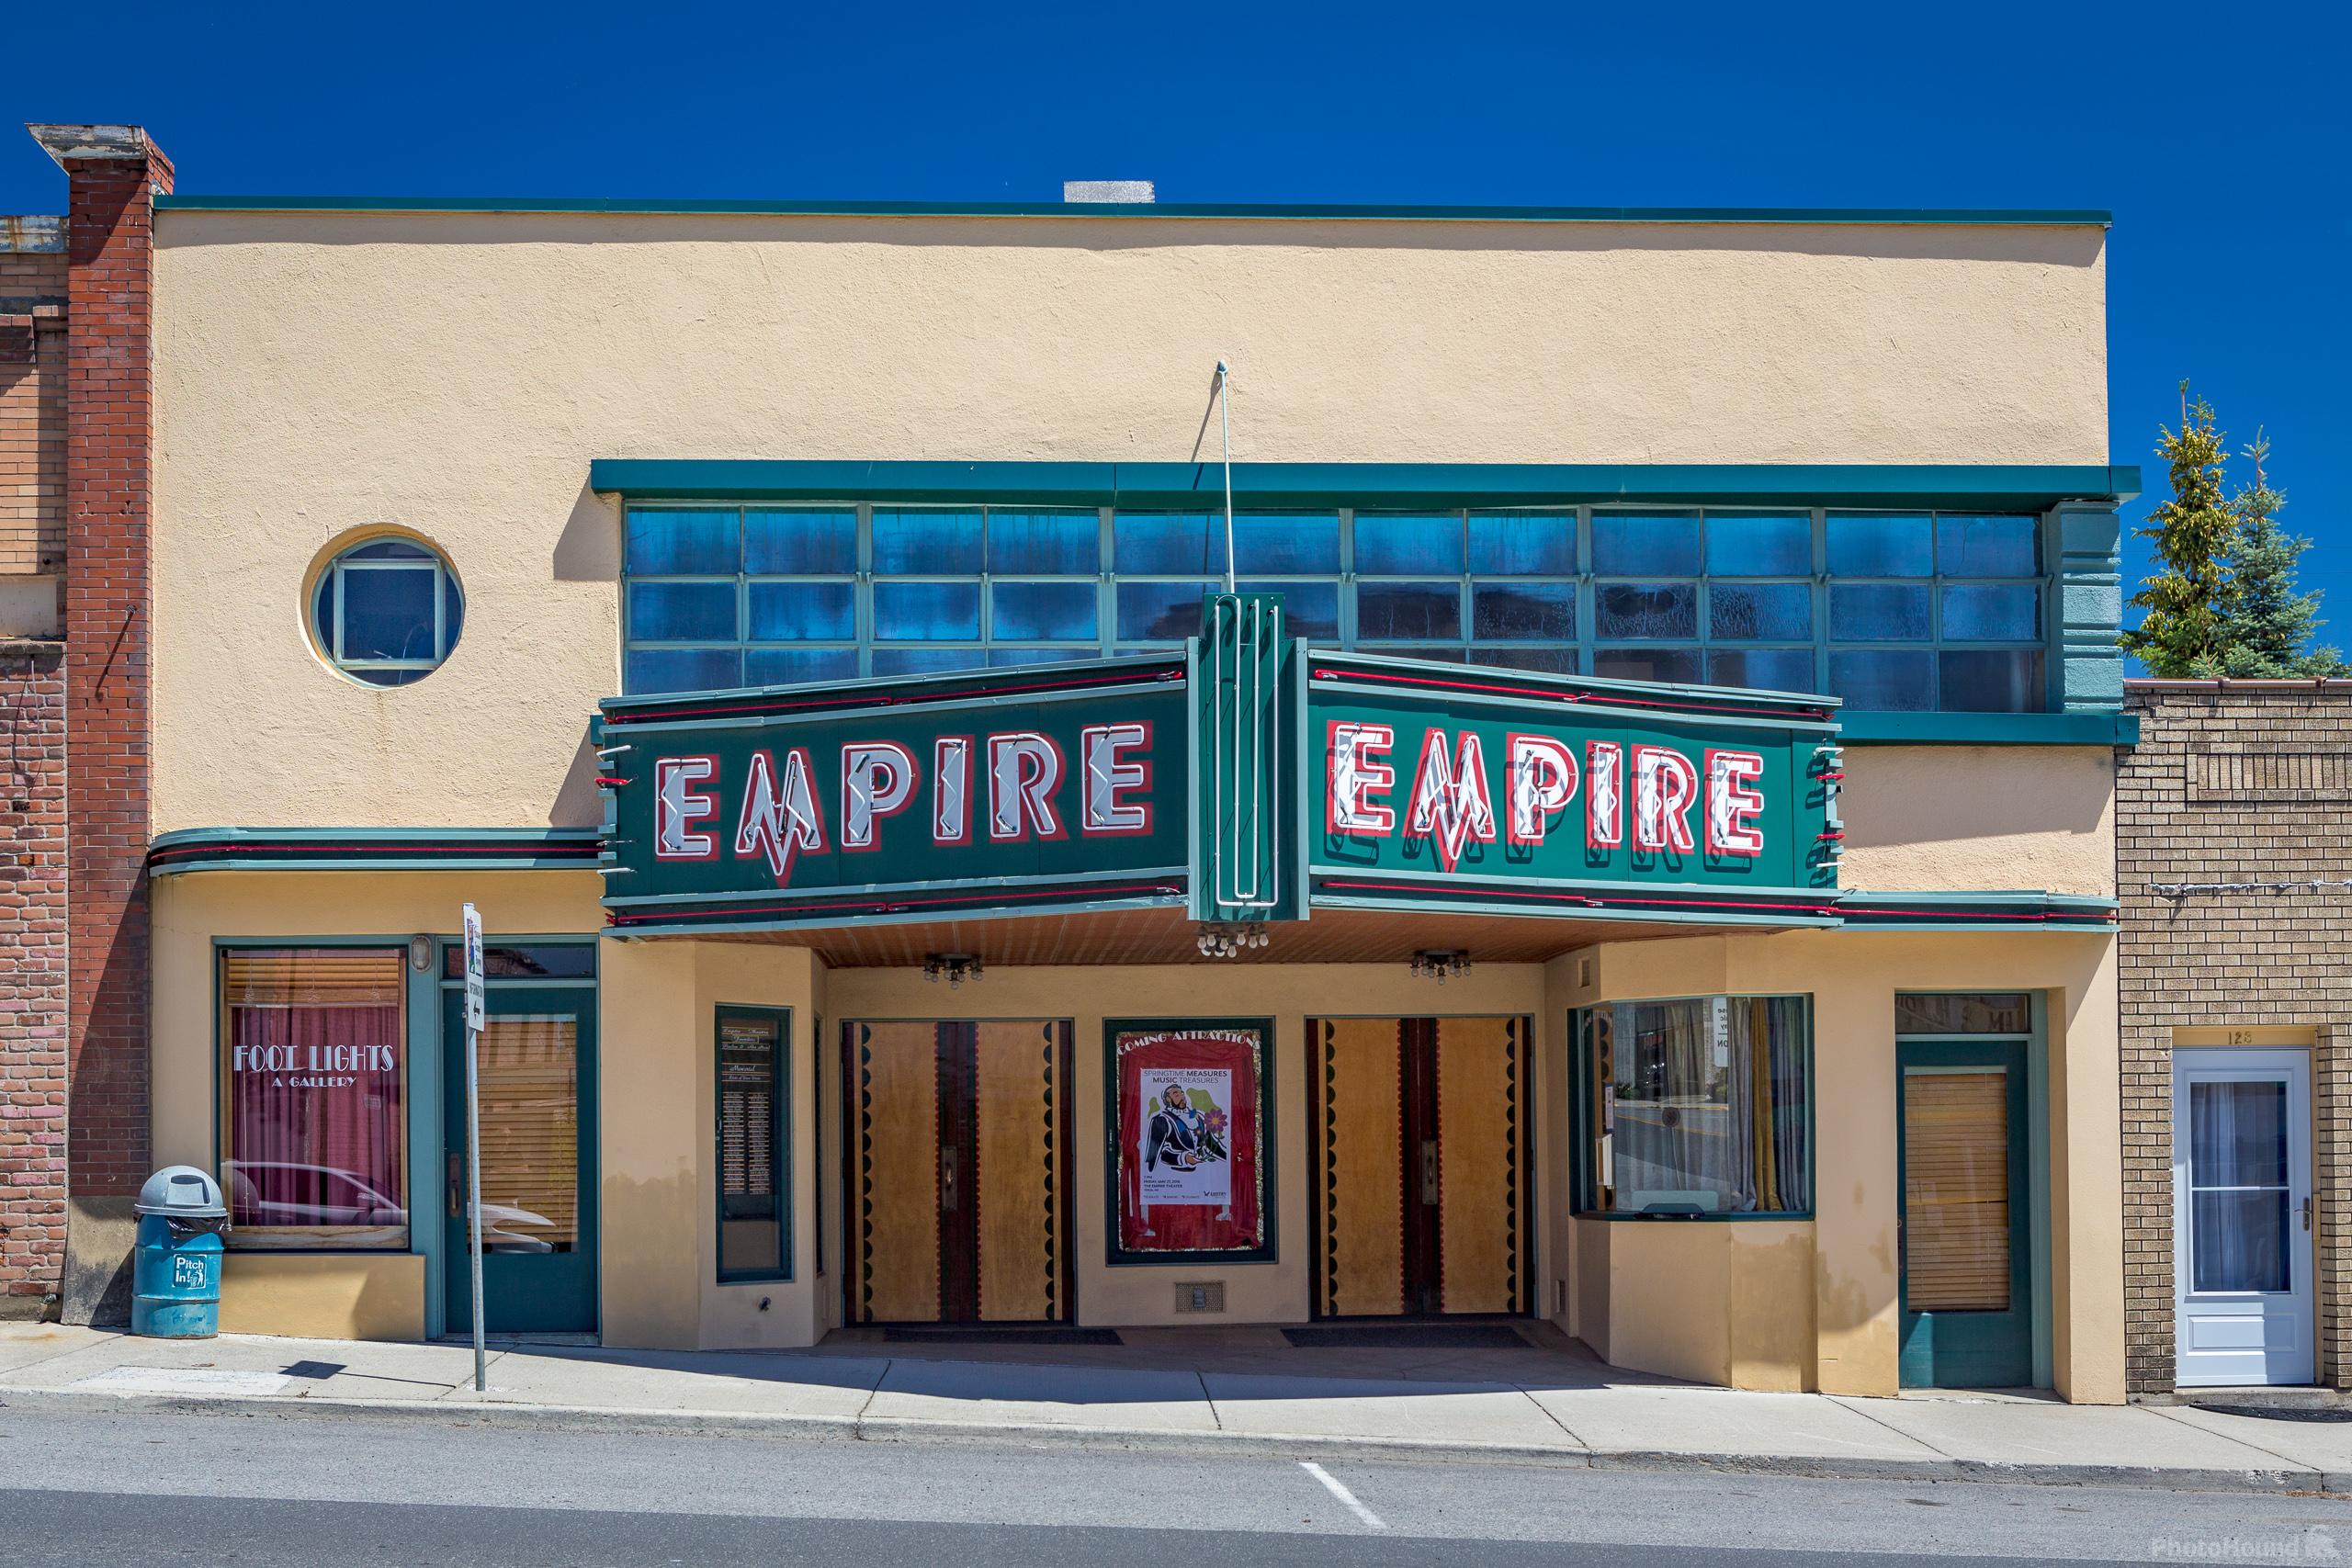 Image of Empire Theater by Joe Becker